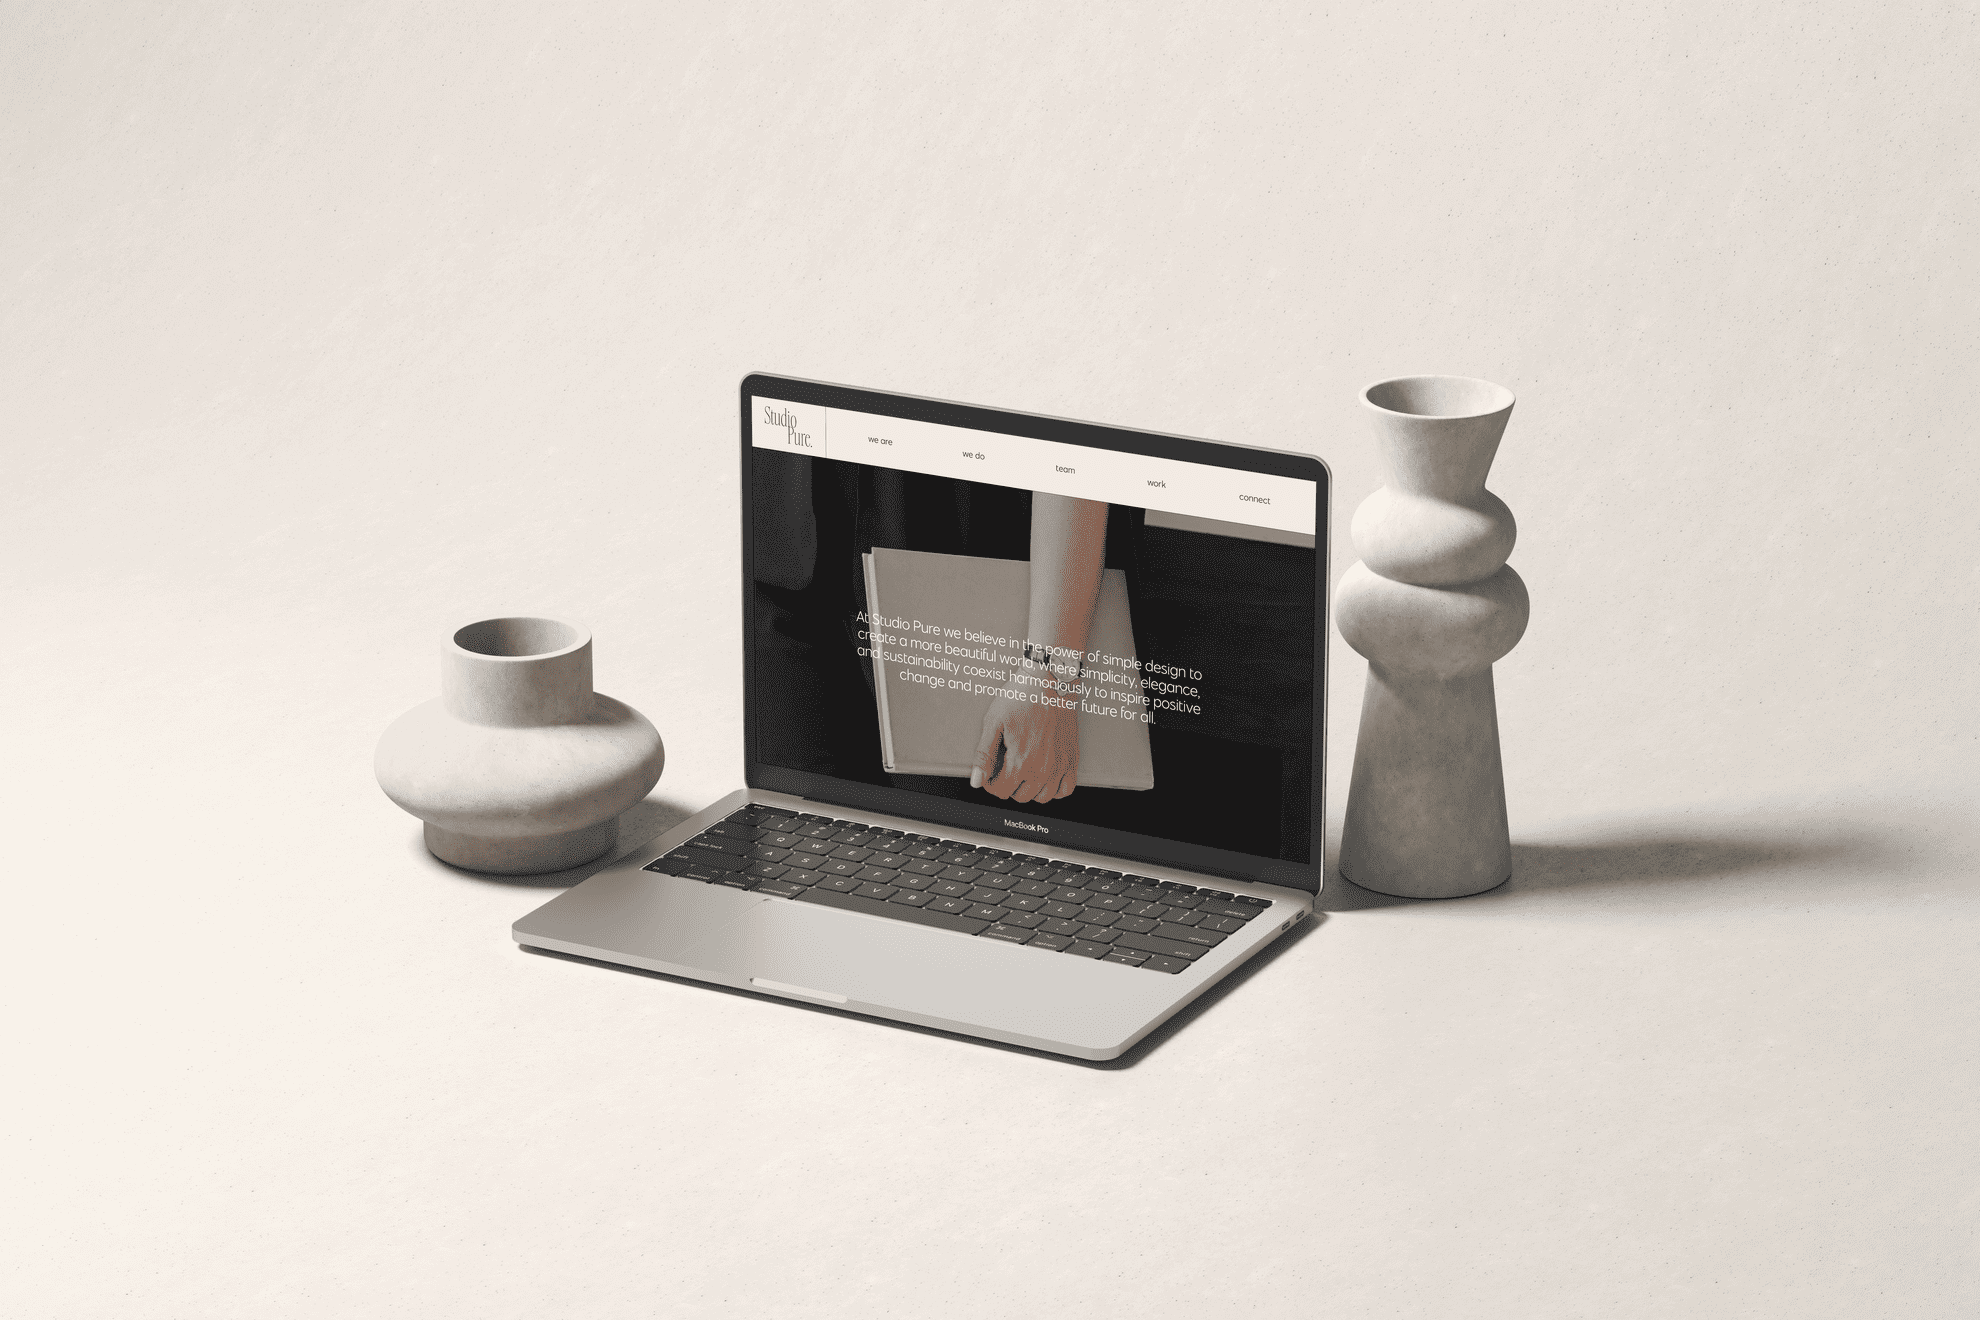 A laptop is sitting on a table next to vases and a vase, belonging to a WordPress Designer.